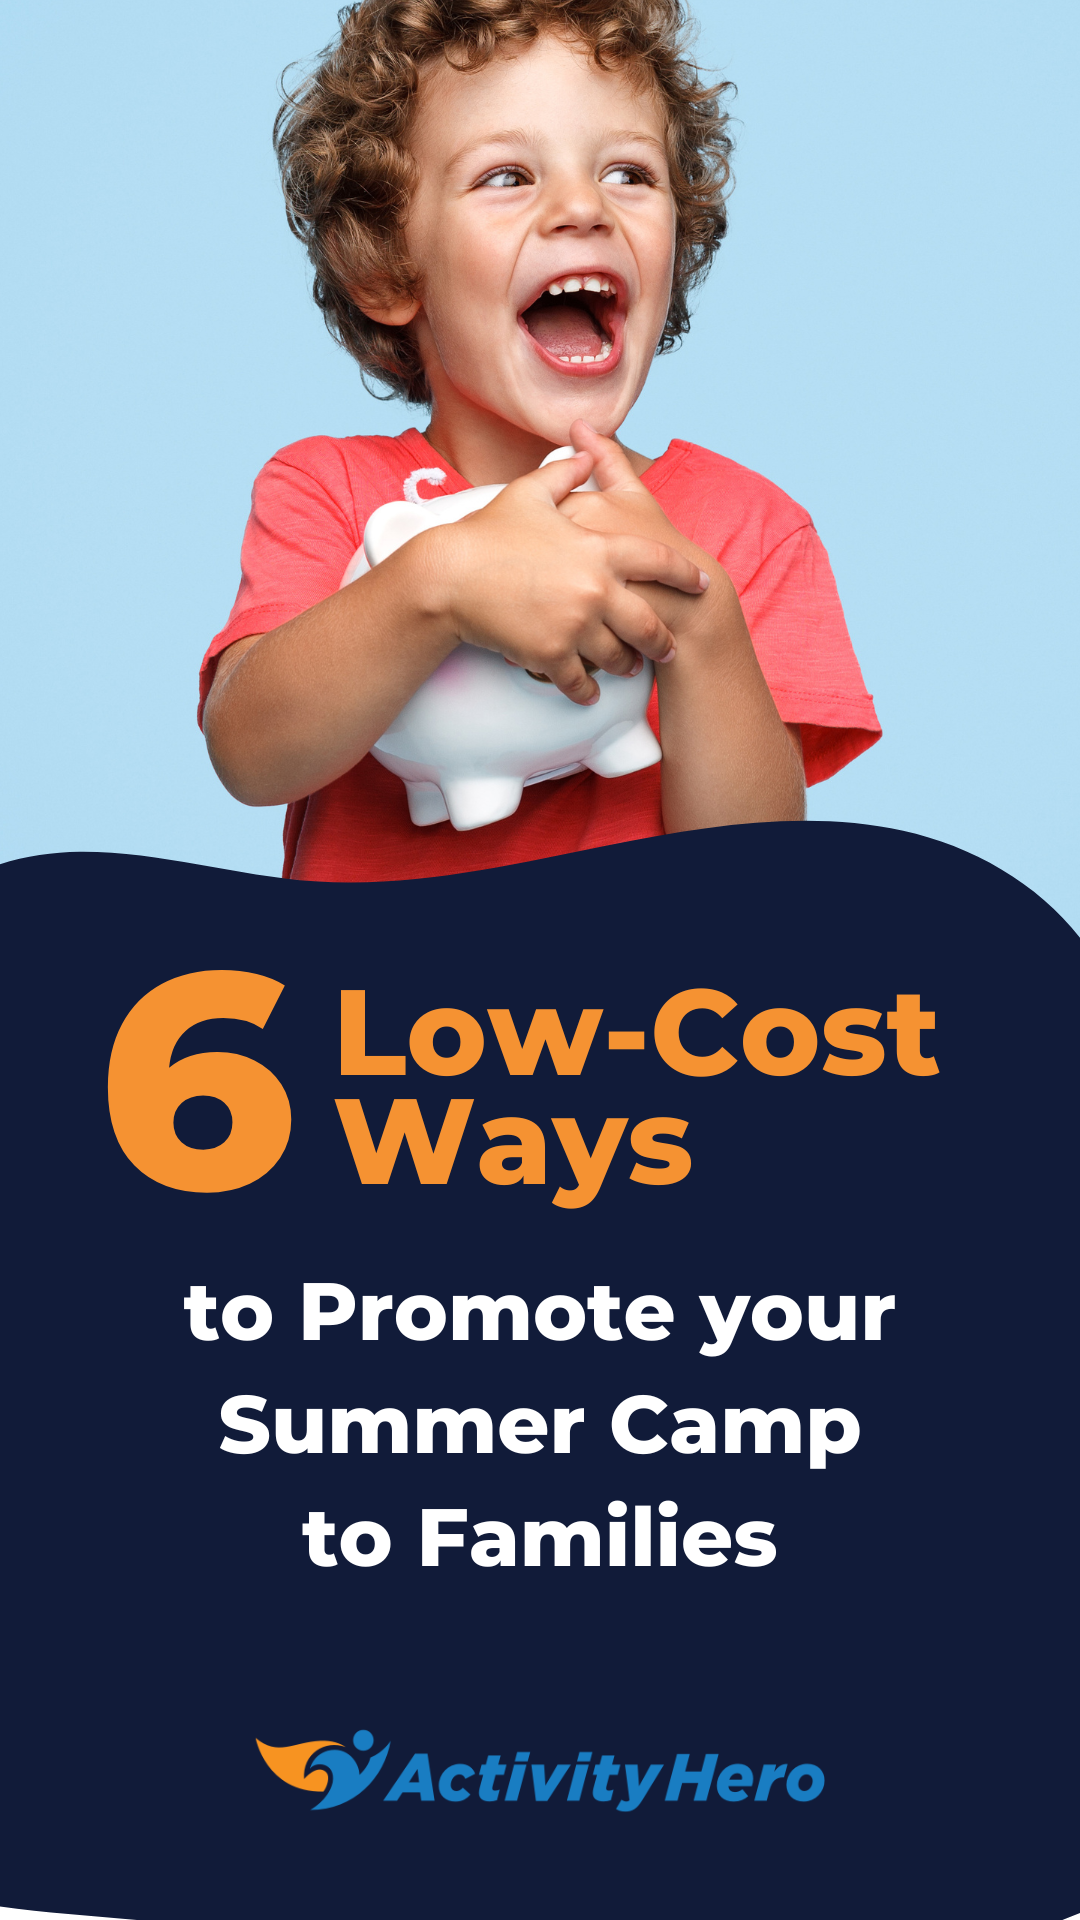  6 Low-Cost ways to promote your summer camp